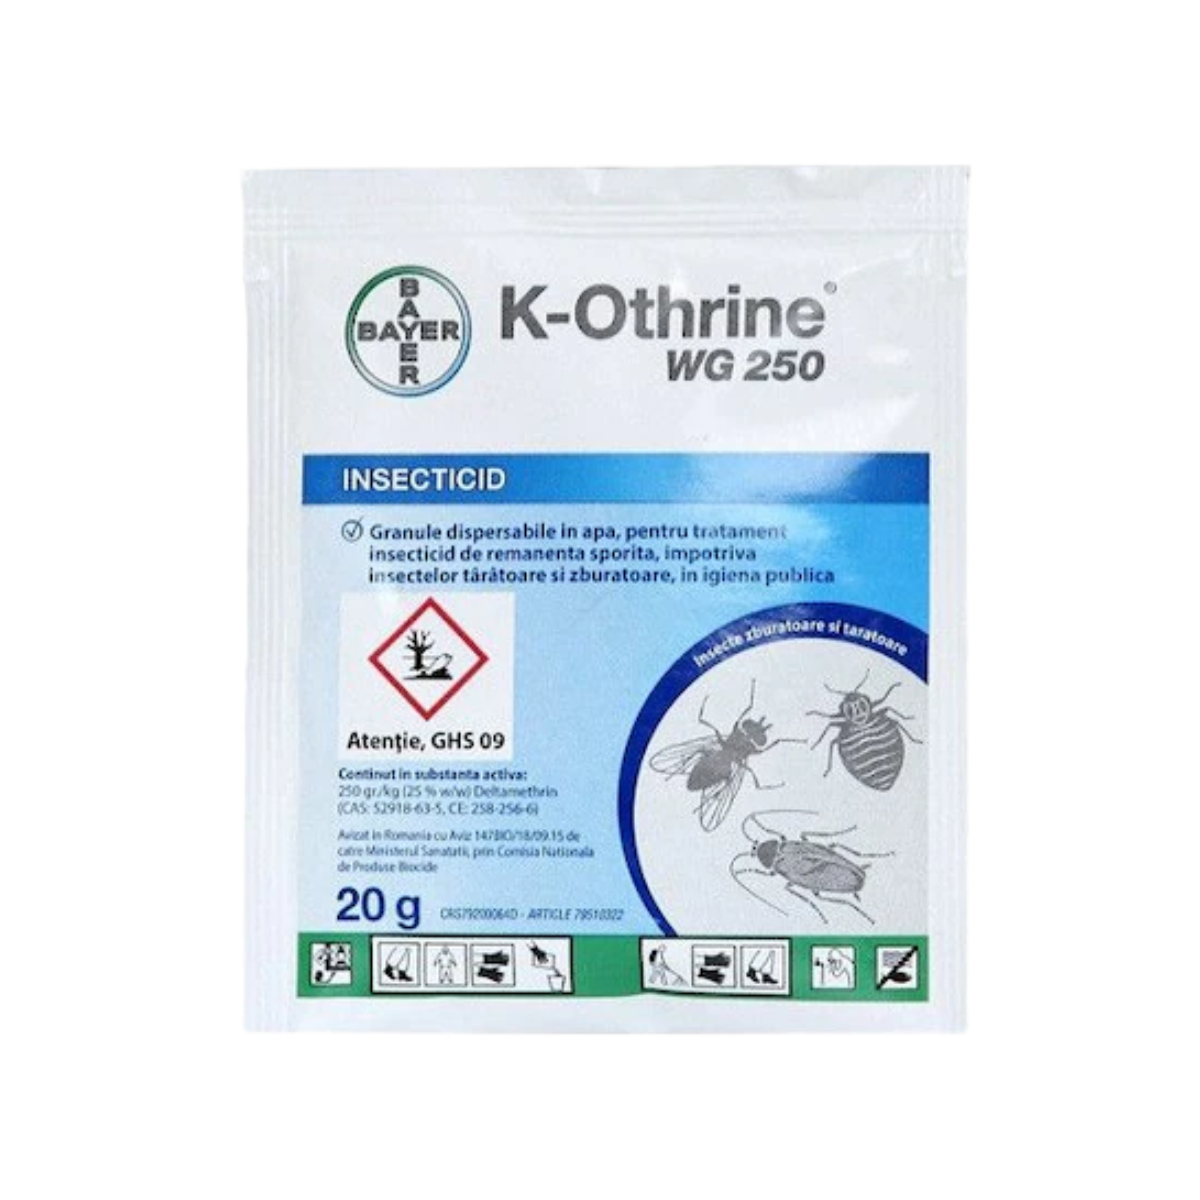 Insecticide - Insecticid K-Othrine 250 WG 20 Grame Bayer, hectarul.ro